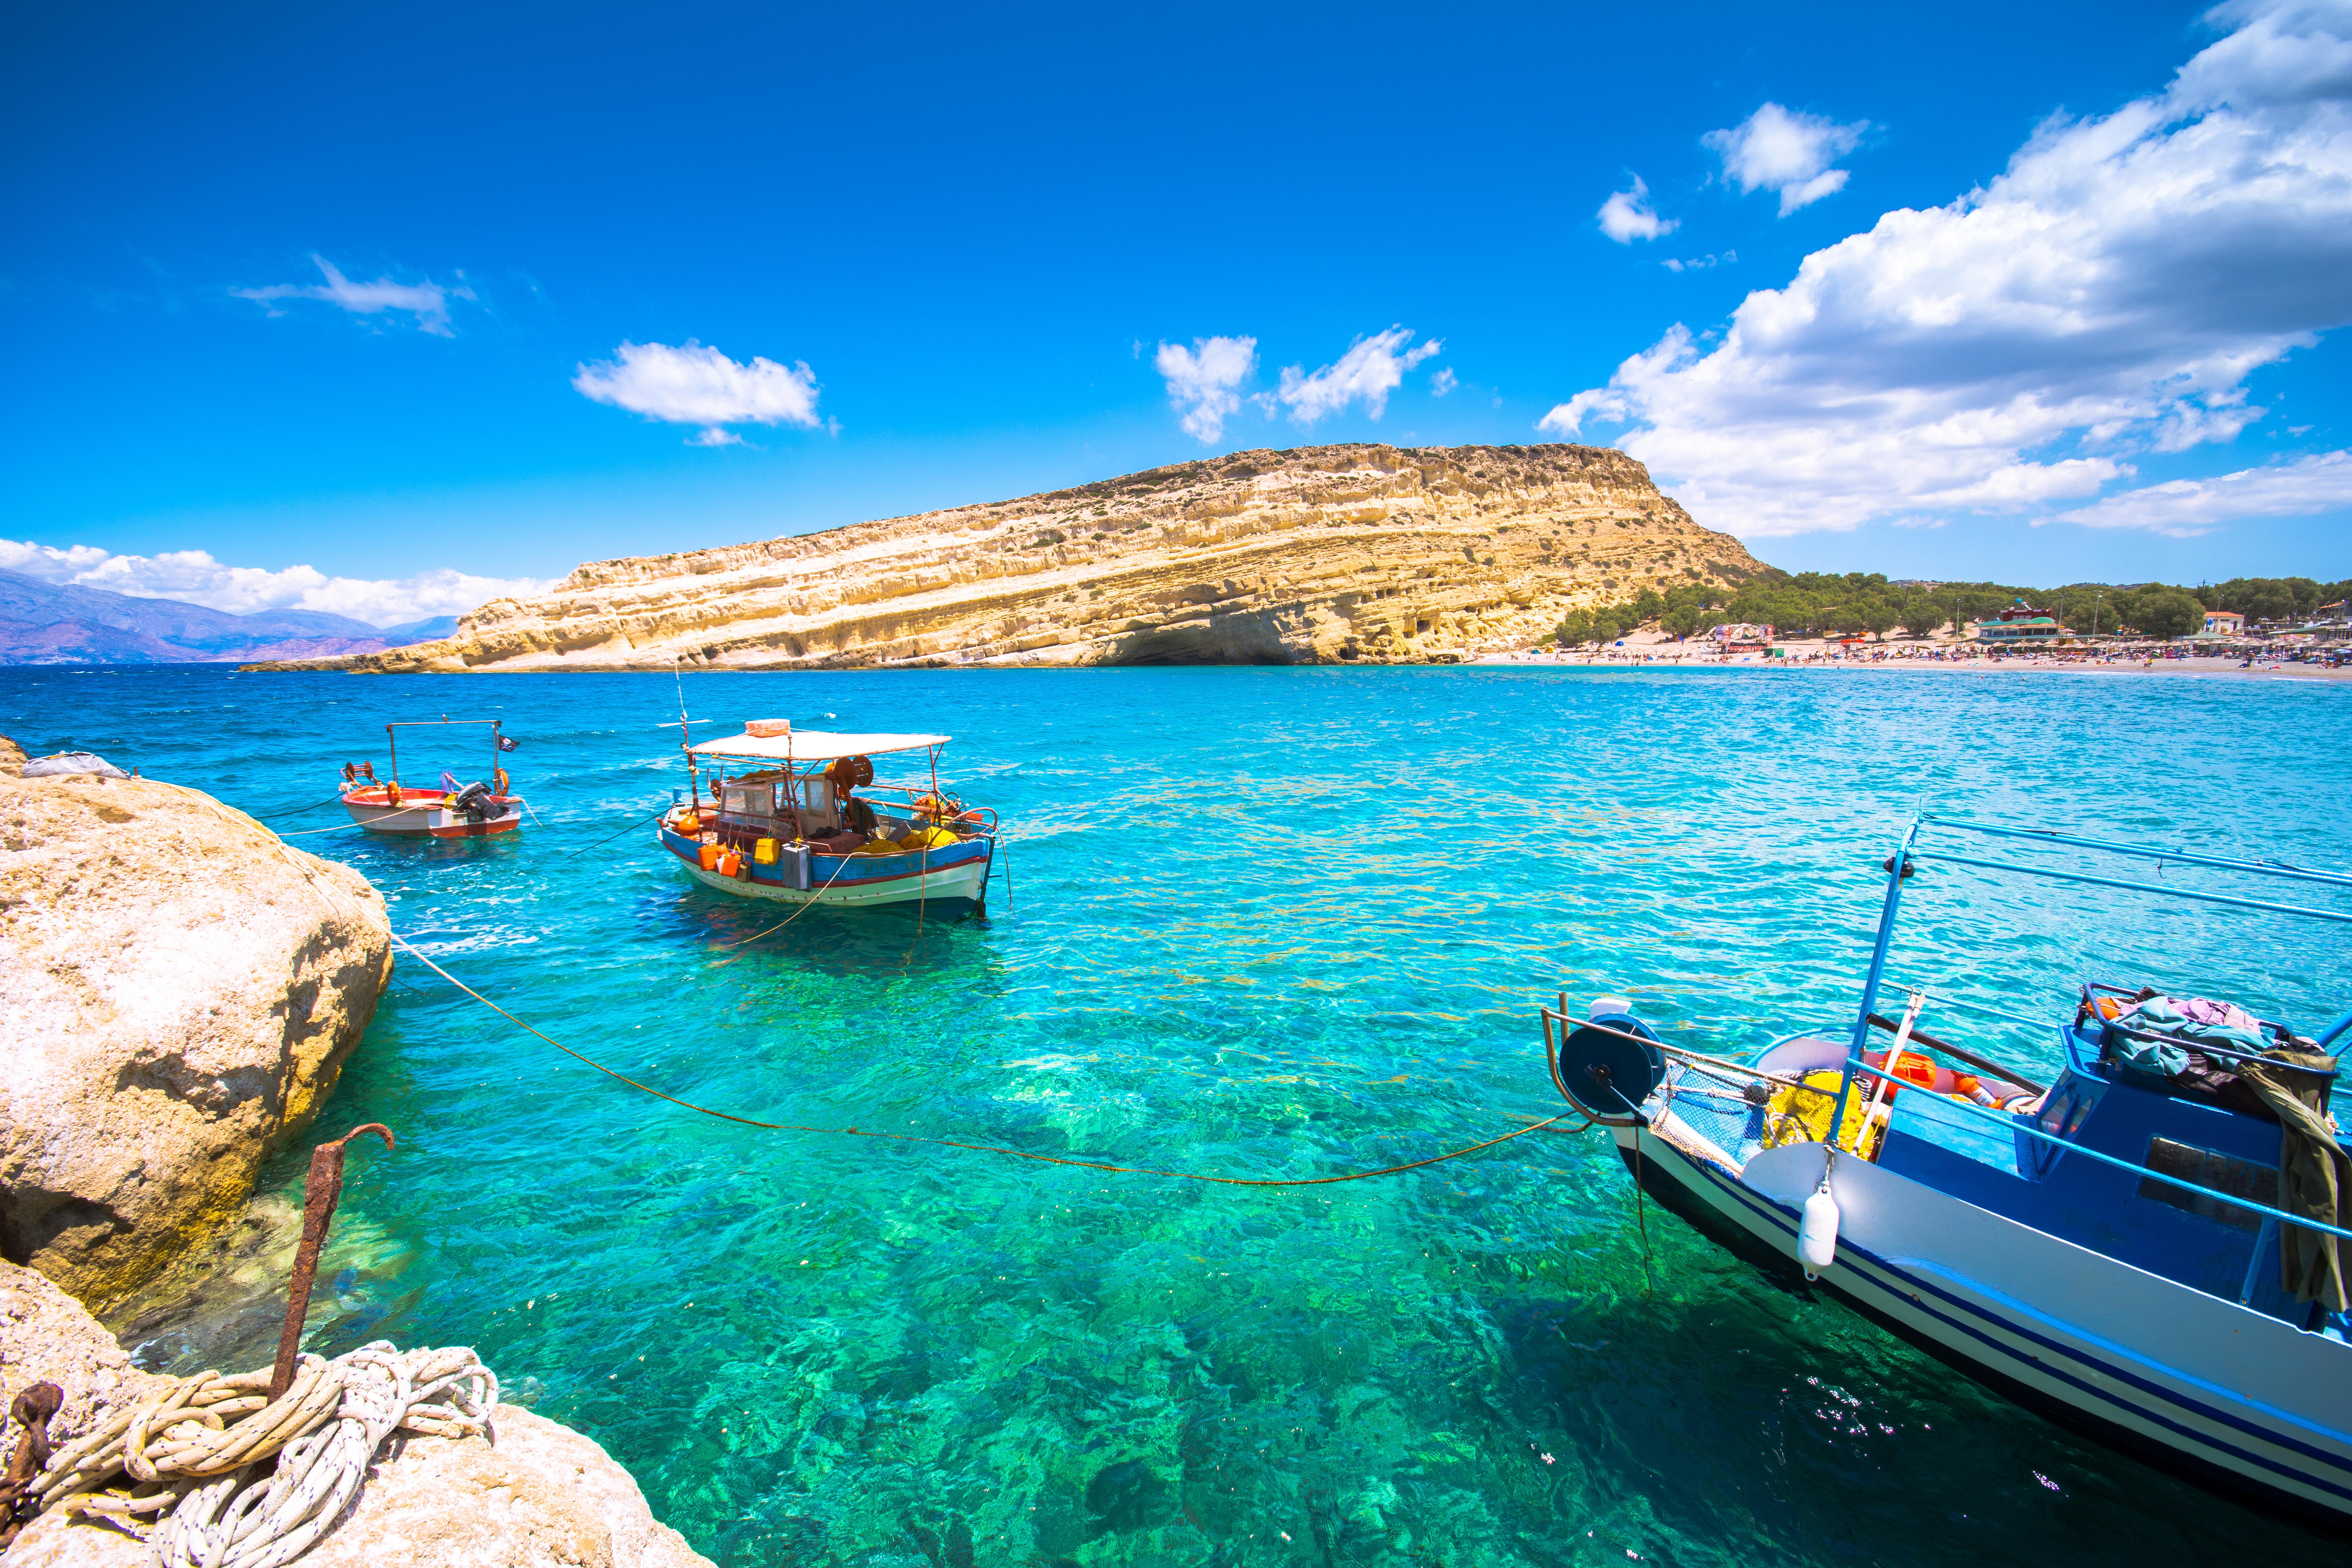 A layover in Crete could lower the cost of a journey